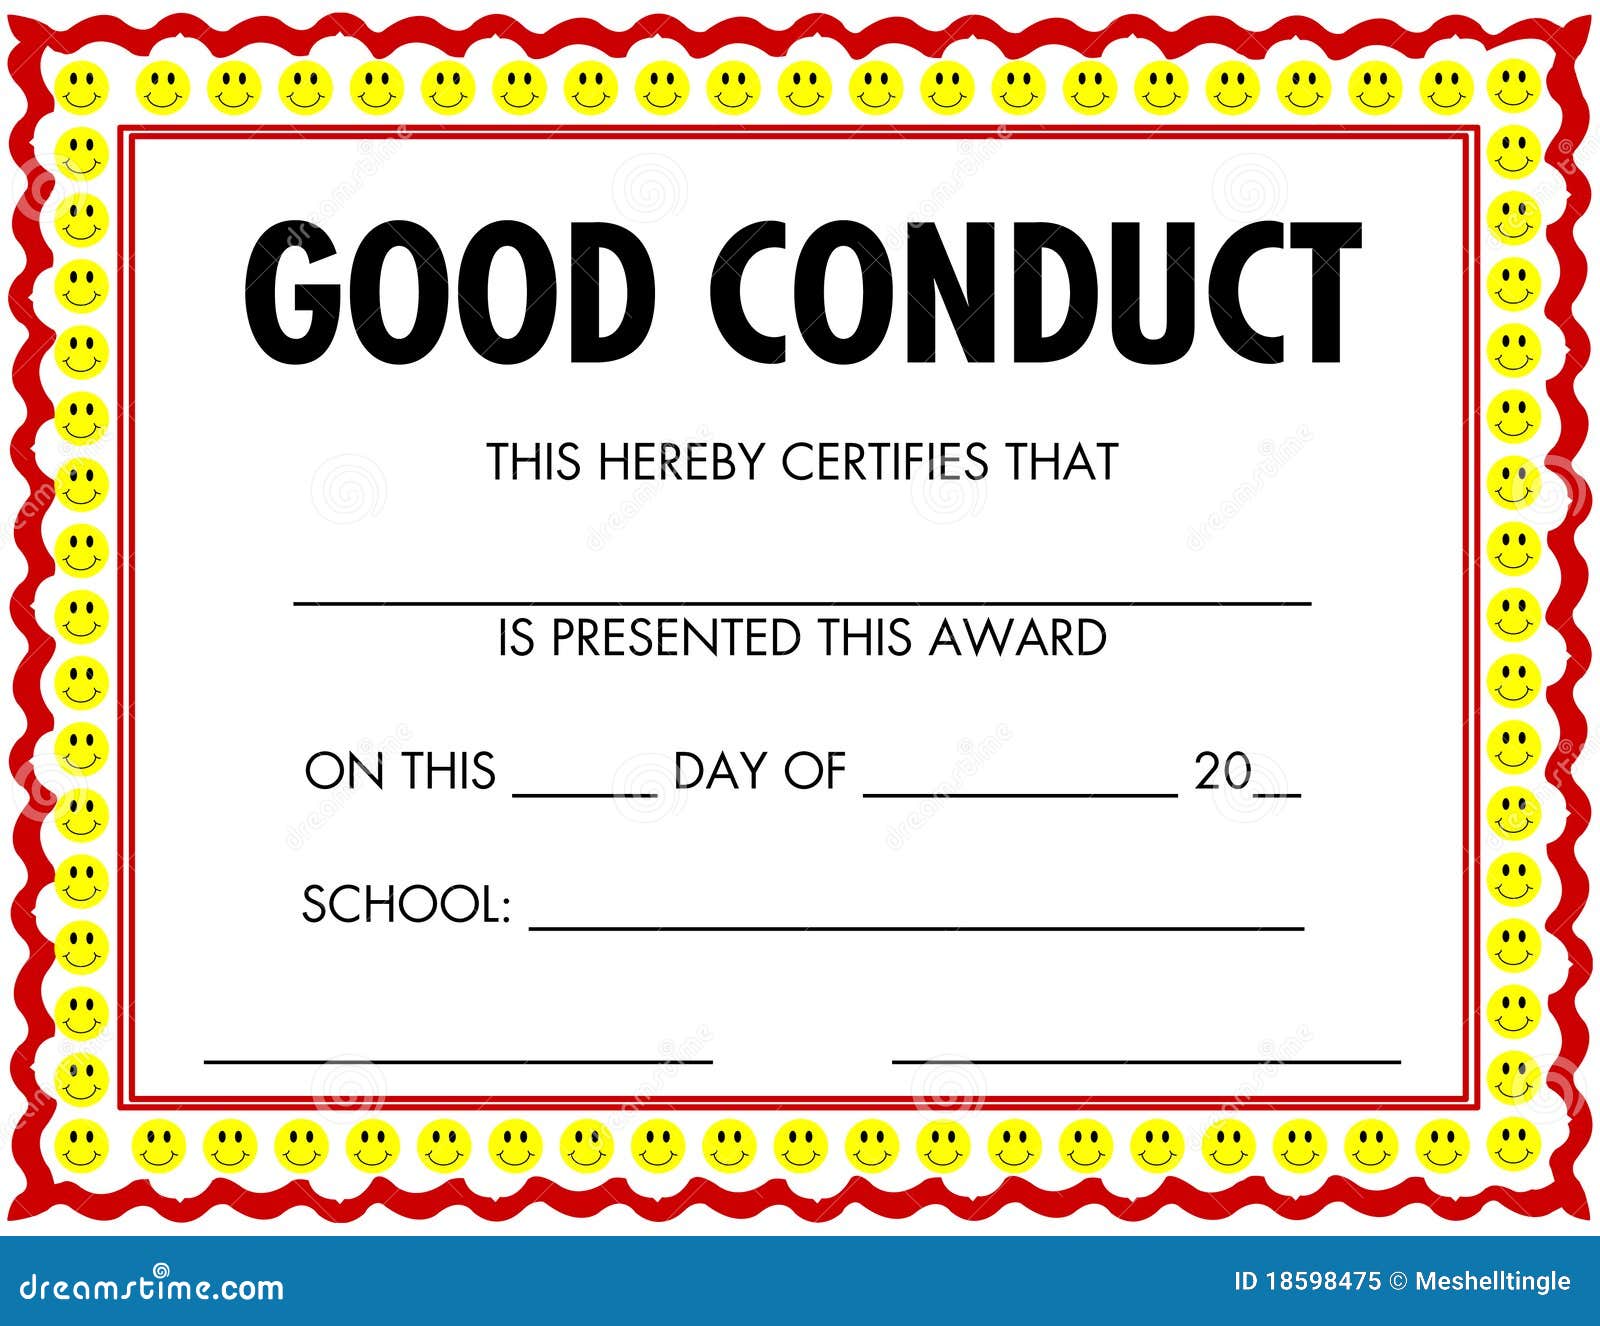 Award Certificate Good Conduct Stock Vector - Illustration of Pertaining To Good Conduct Certificate Template